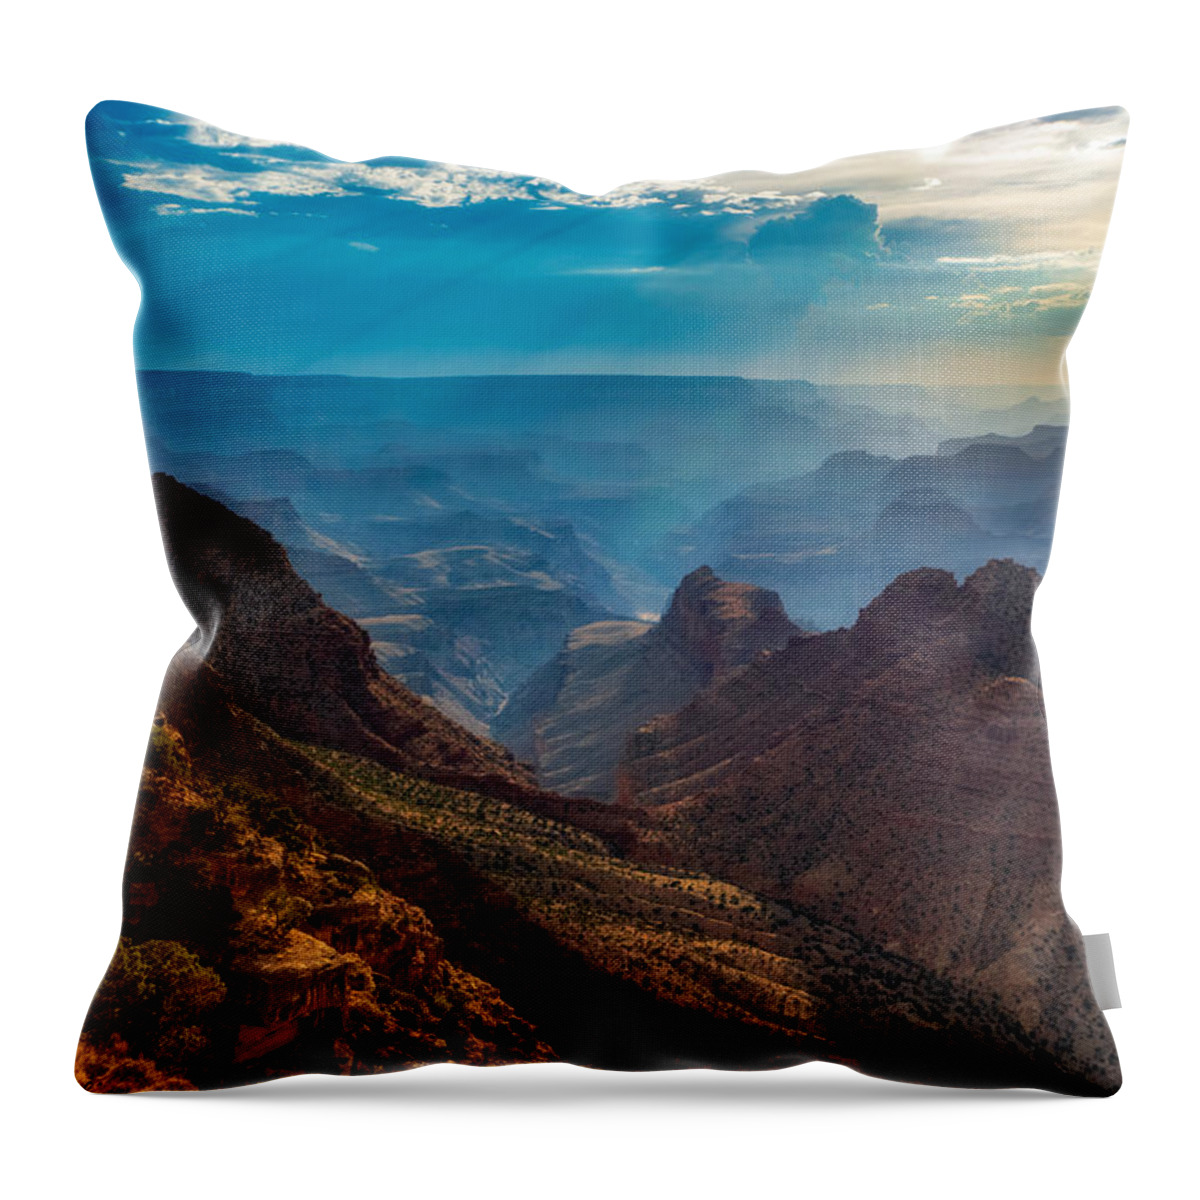 Grand Canyon Foggy Fog Arizona Geology Fstop101 Landscape Blue Hue Mist Misty Throw Pillow featuring the photograph Grand Canyon Foggy Evening by Geno Lee